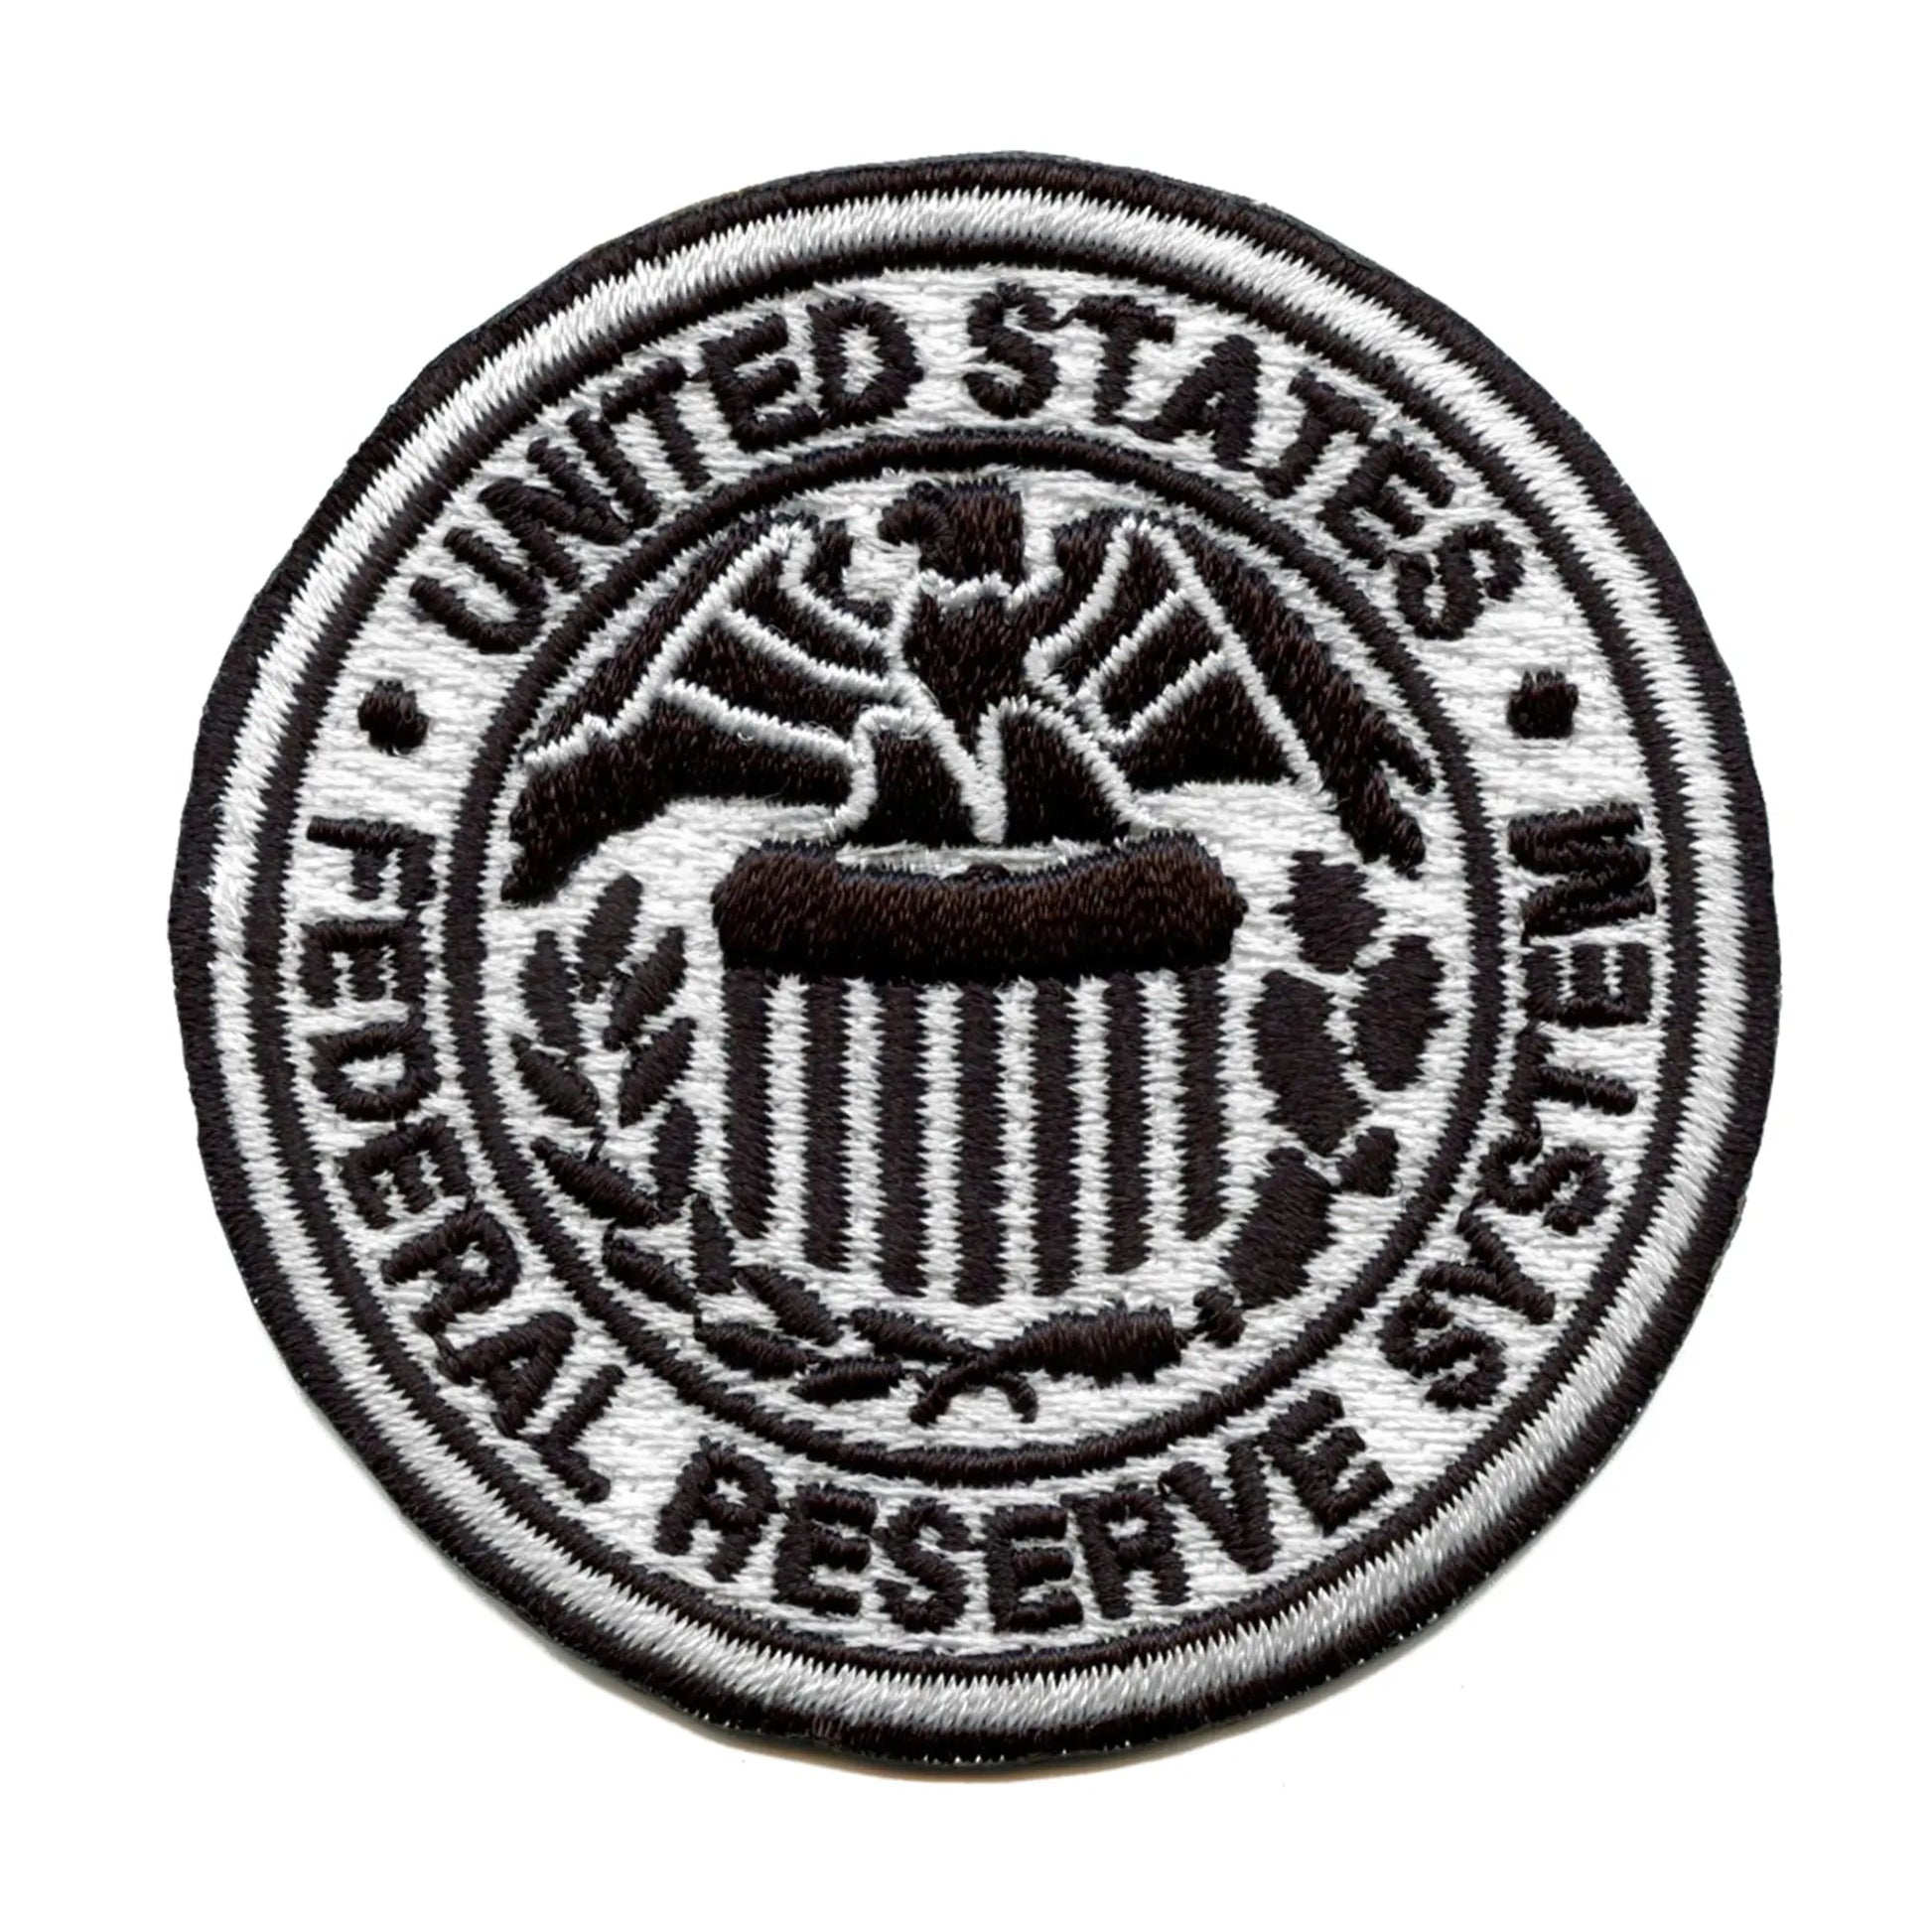 Federal Reserve System Patch Government Money Bank Embroidered Iron On